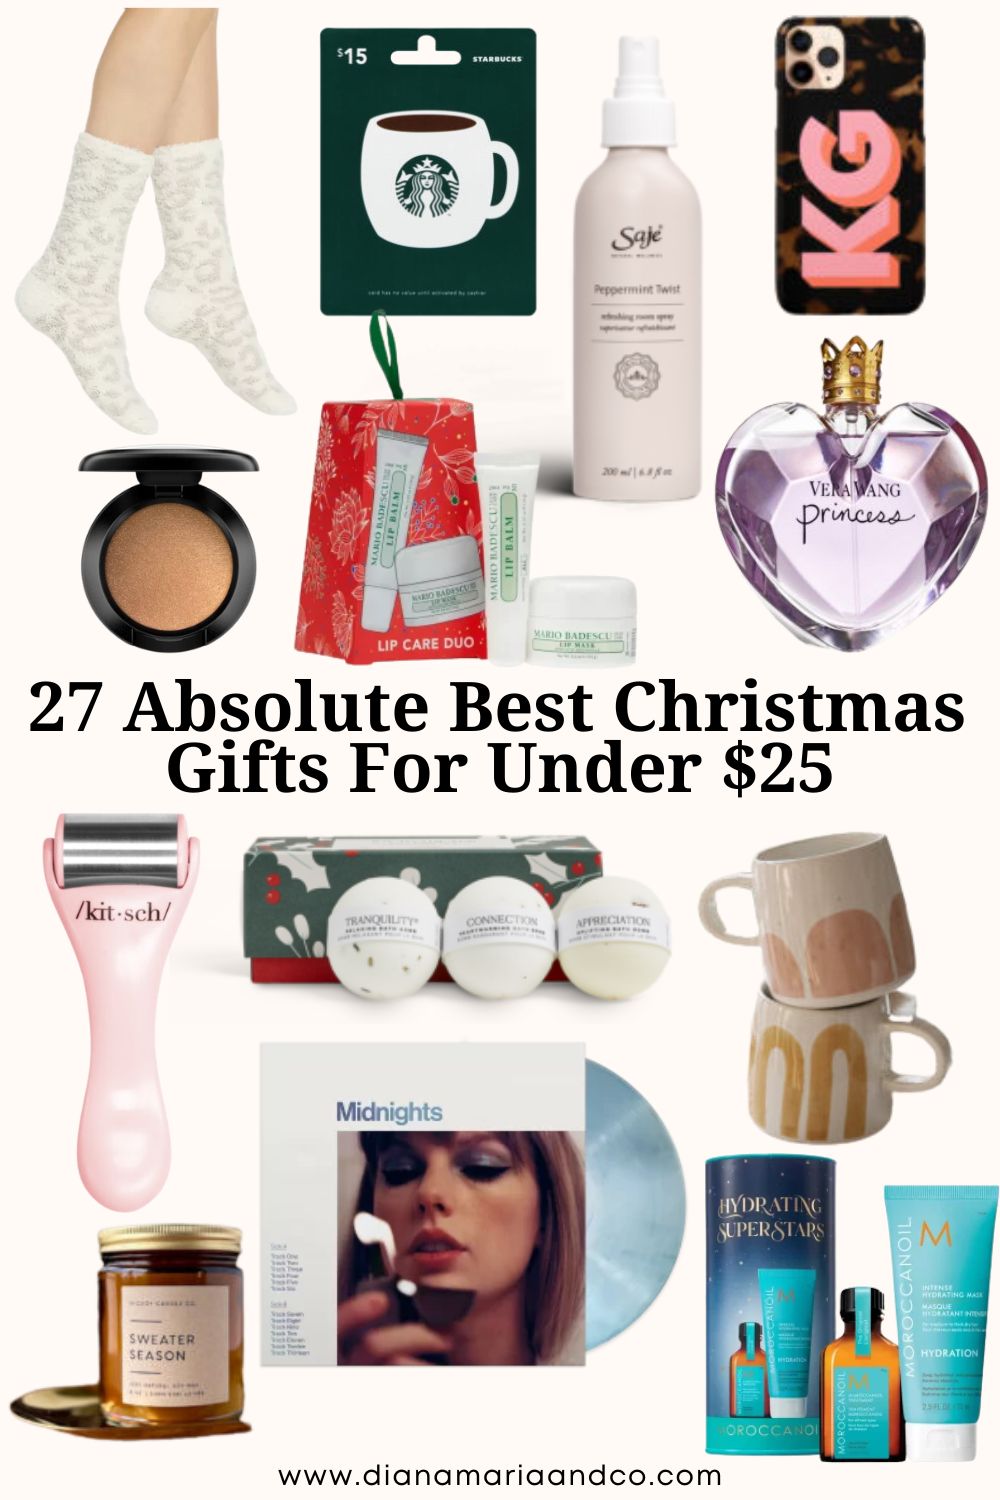 The Best Christmas Gifts Under $25 That Are Totally Worth It - Diana Maria  & Co